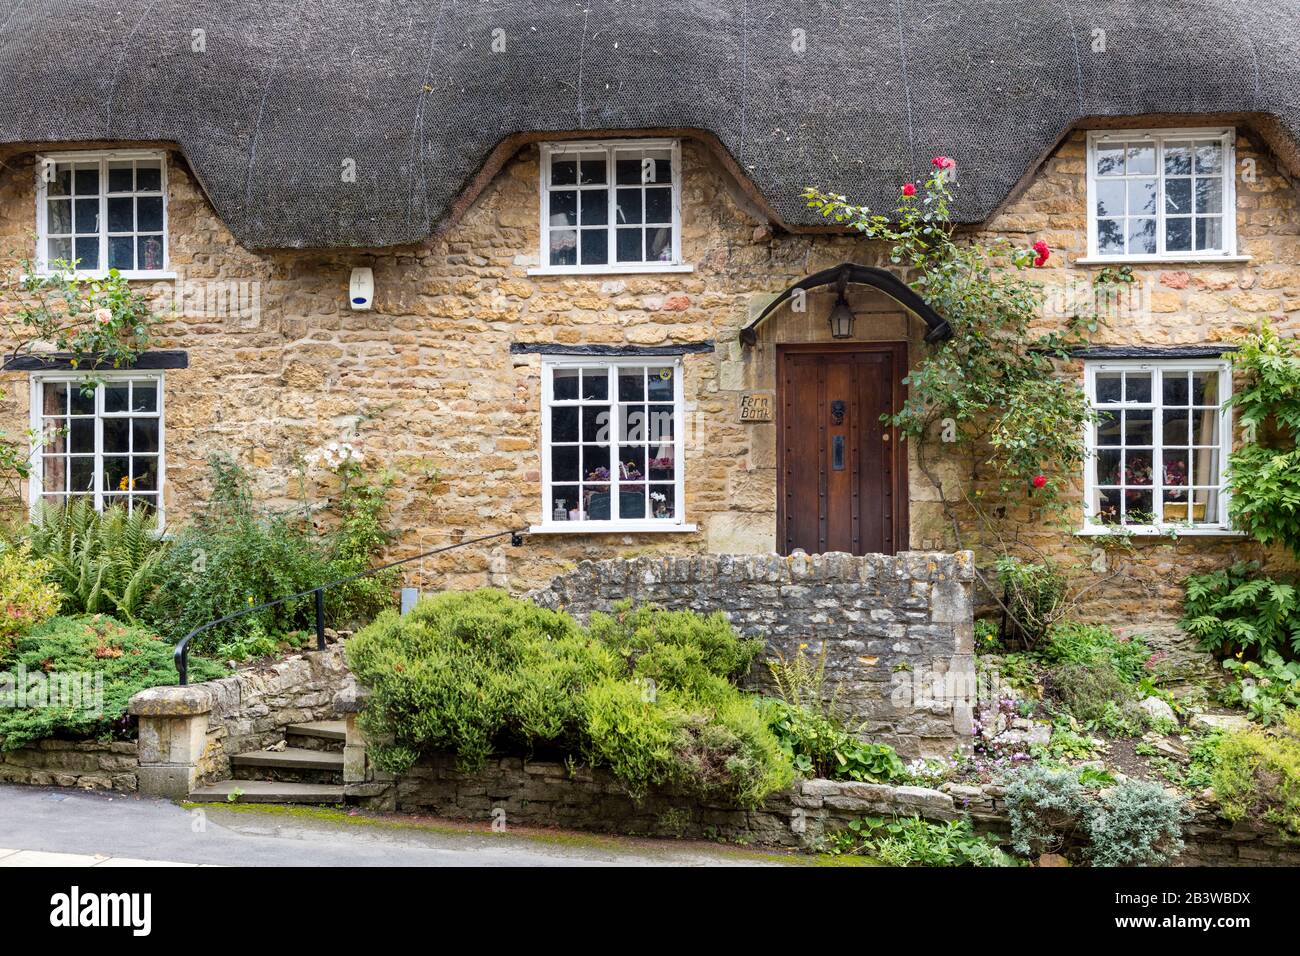 Thatched roof home in Ebrington - Chipping Campden, Gloucestershire, England, UK Stock Photo